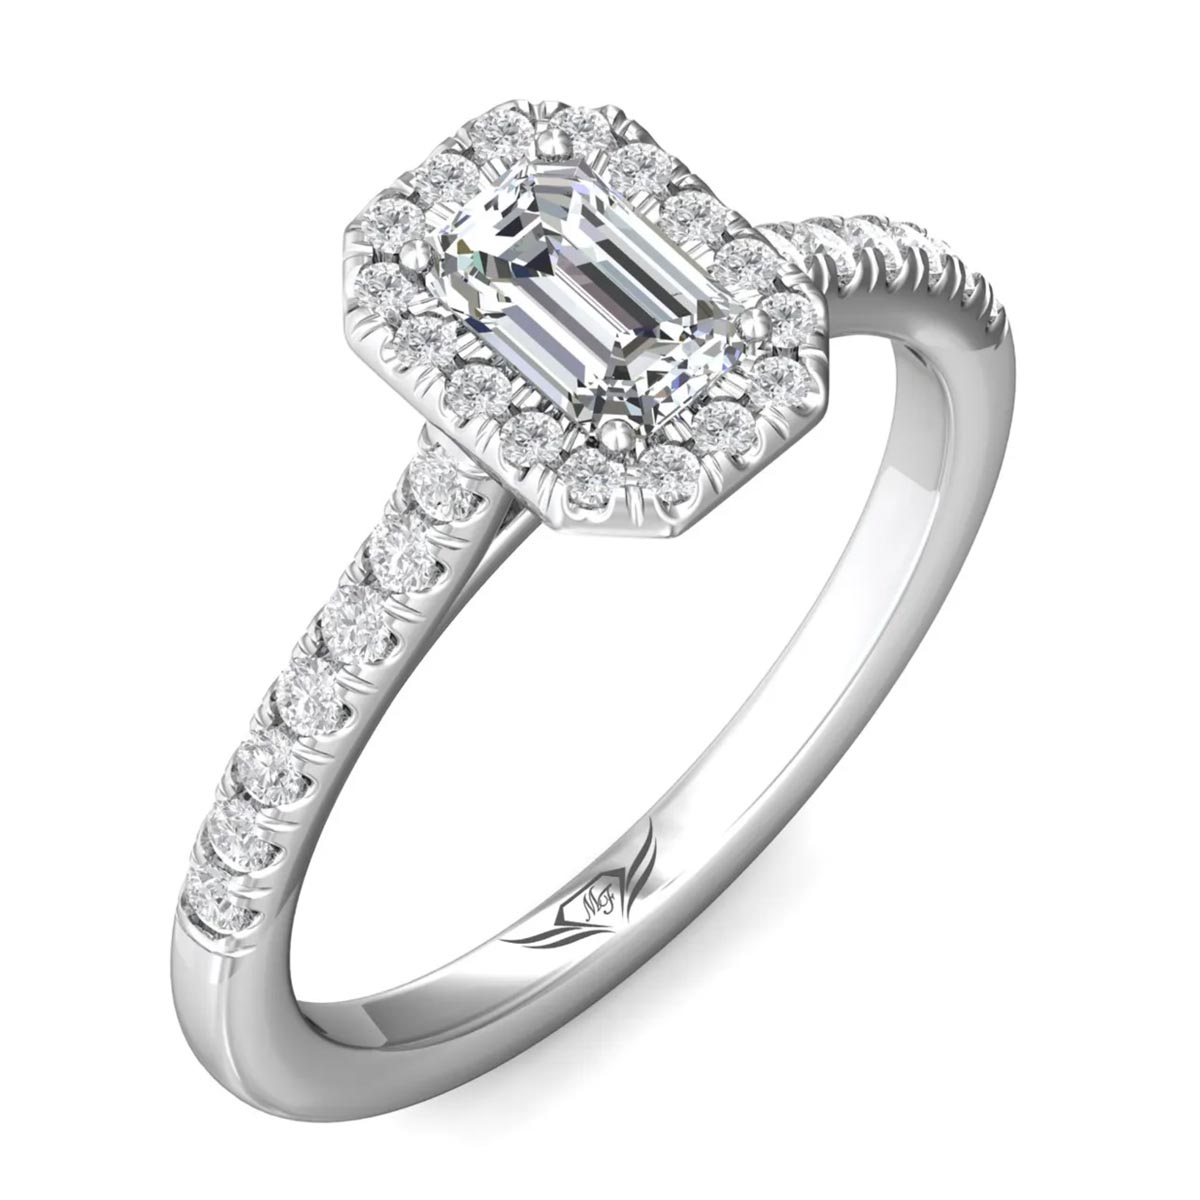 Emerald Cut Diamond Halo Engagement Ring in 14kt White Gold (1ct tw)